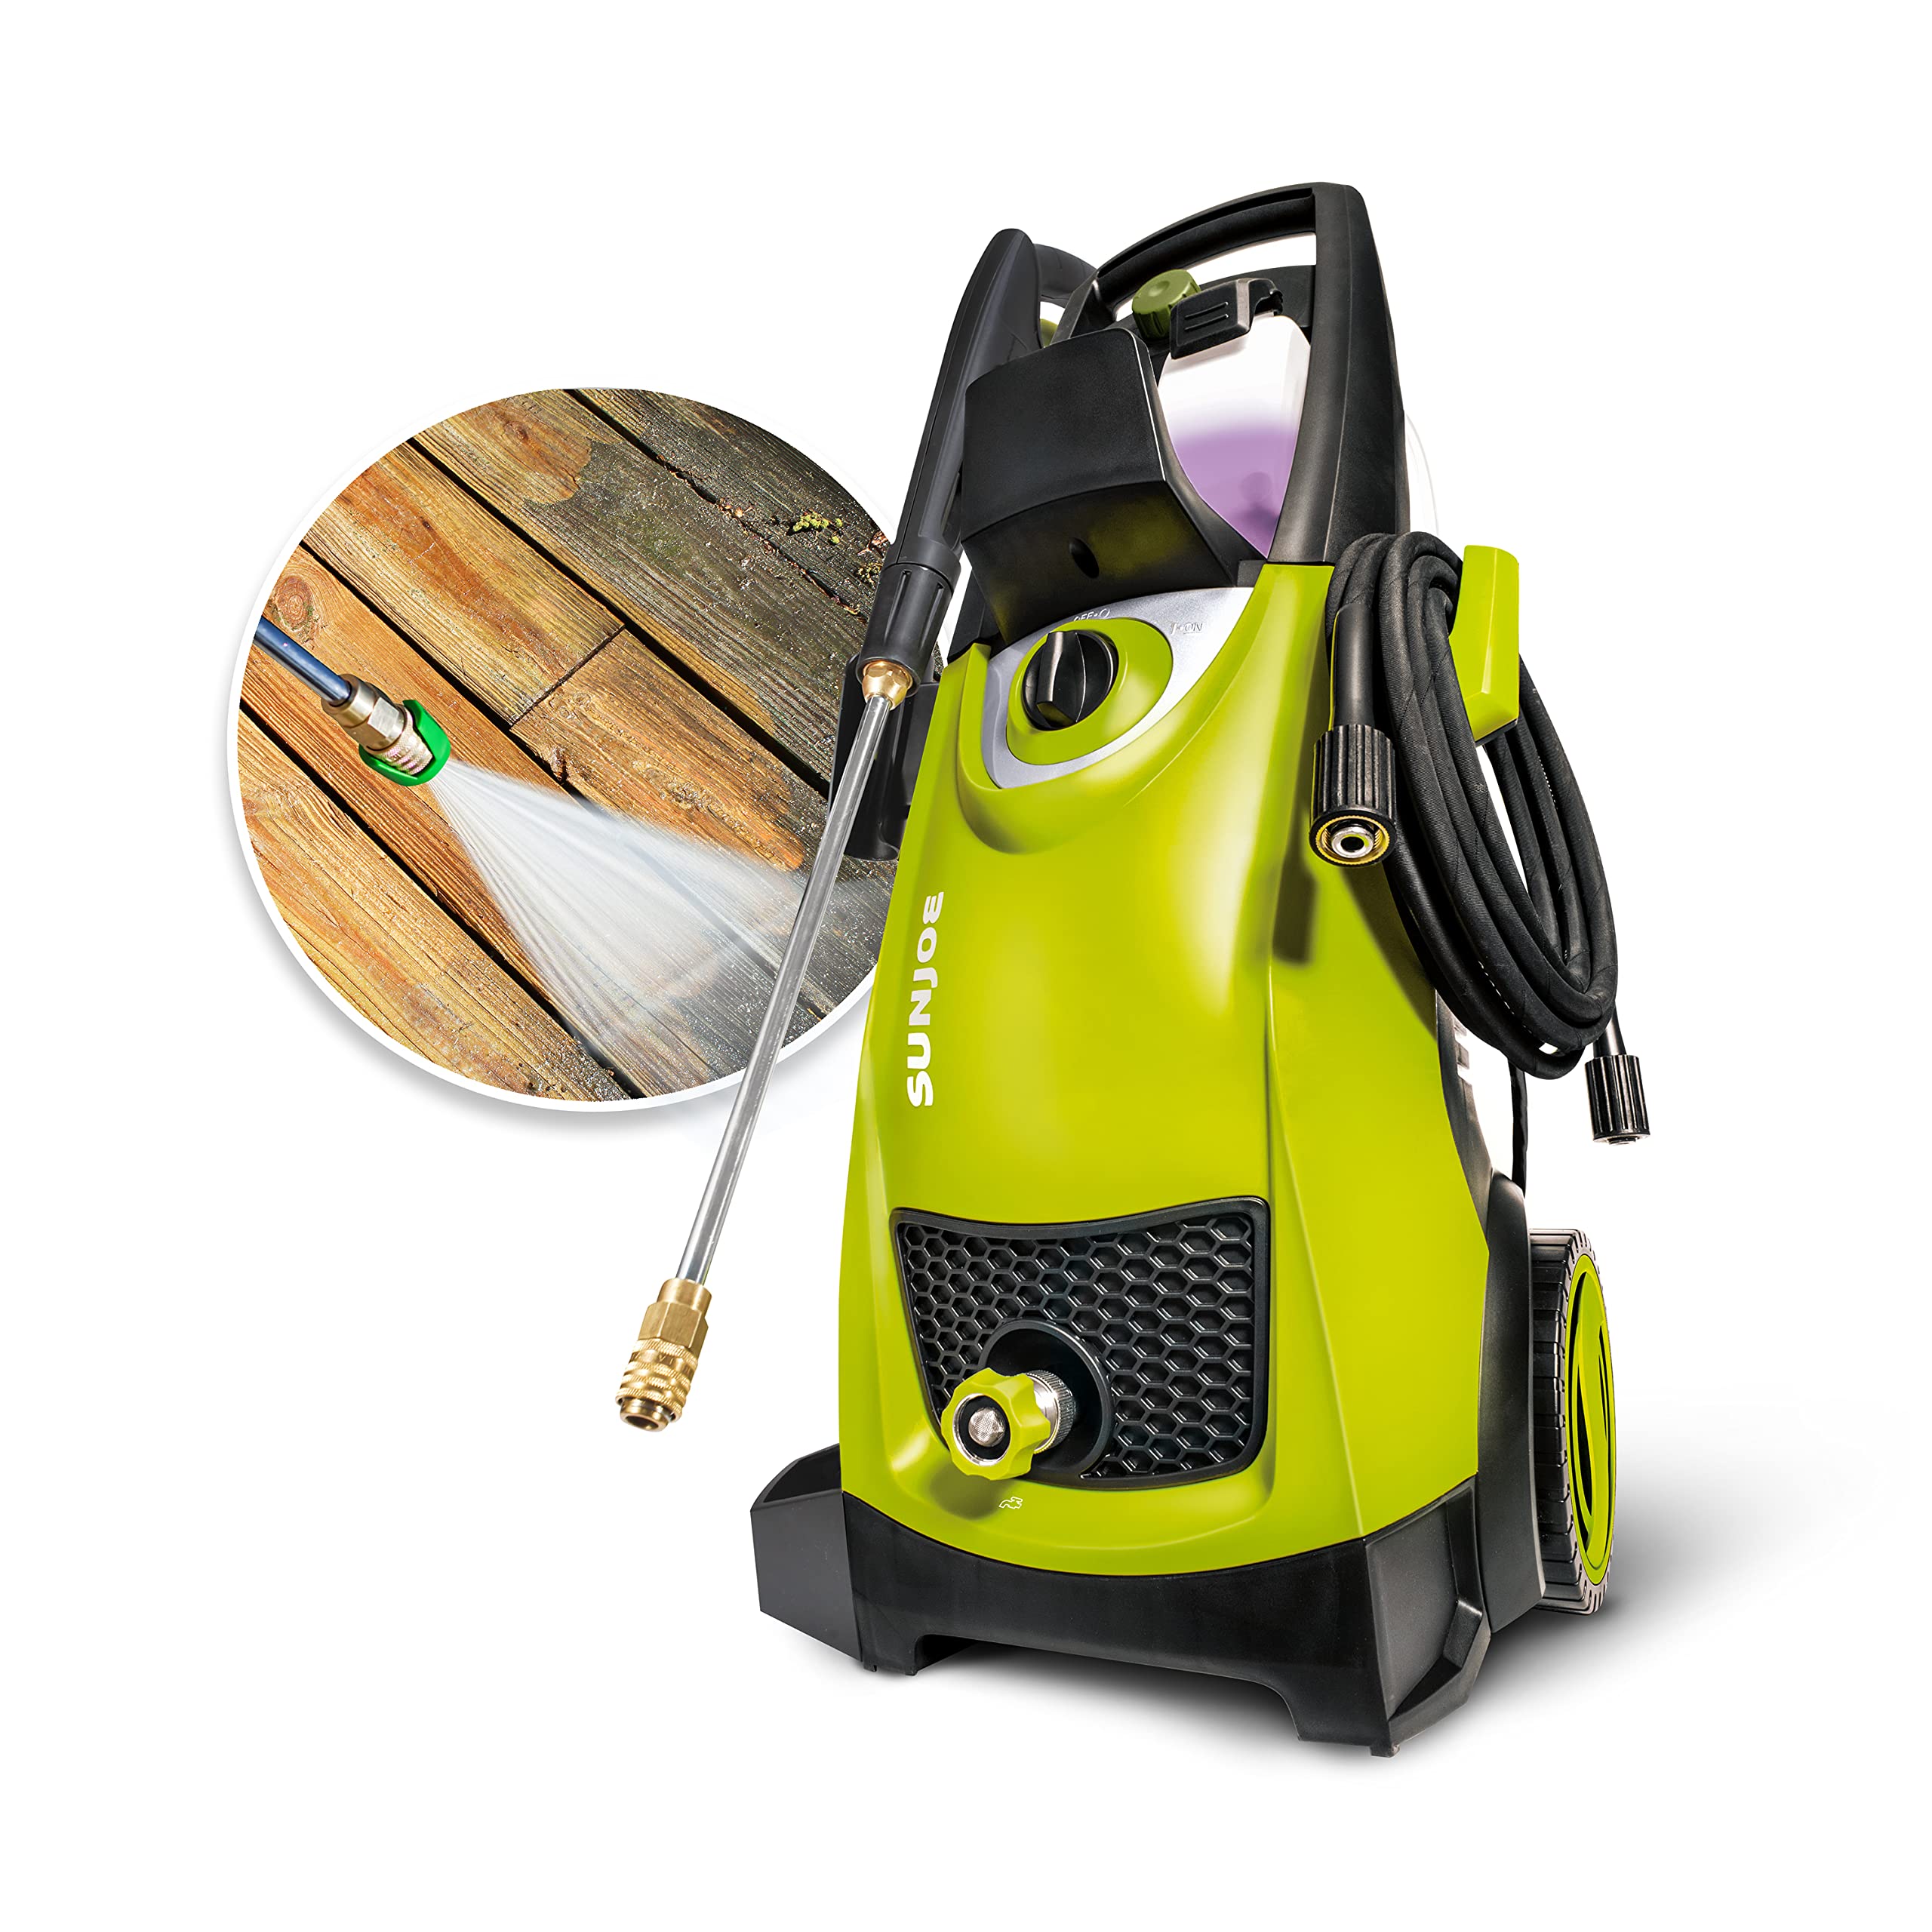 Sun Joe SPX3000 2030 Max PSI 1.76 GPM 14.5-Amp Electric High Pressure Washer, Cleans Cars/Fences/Patios - $129